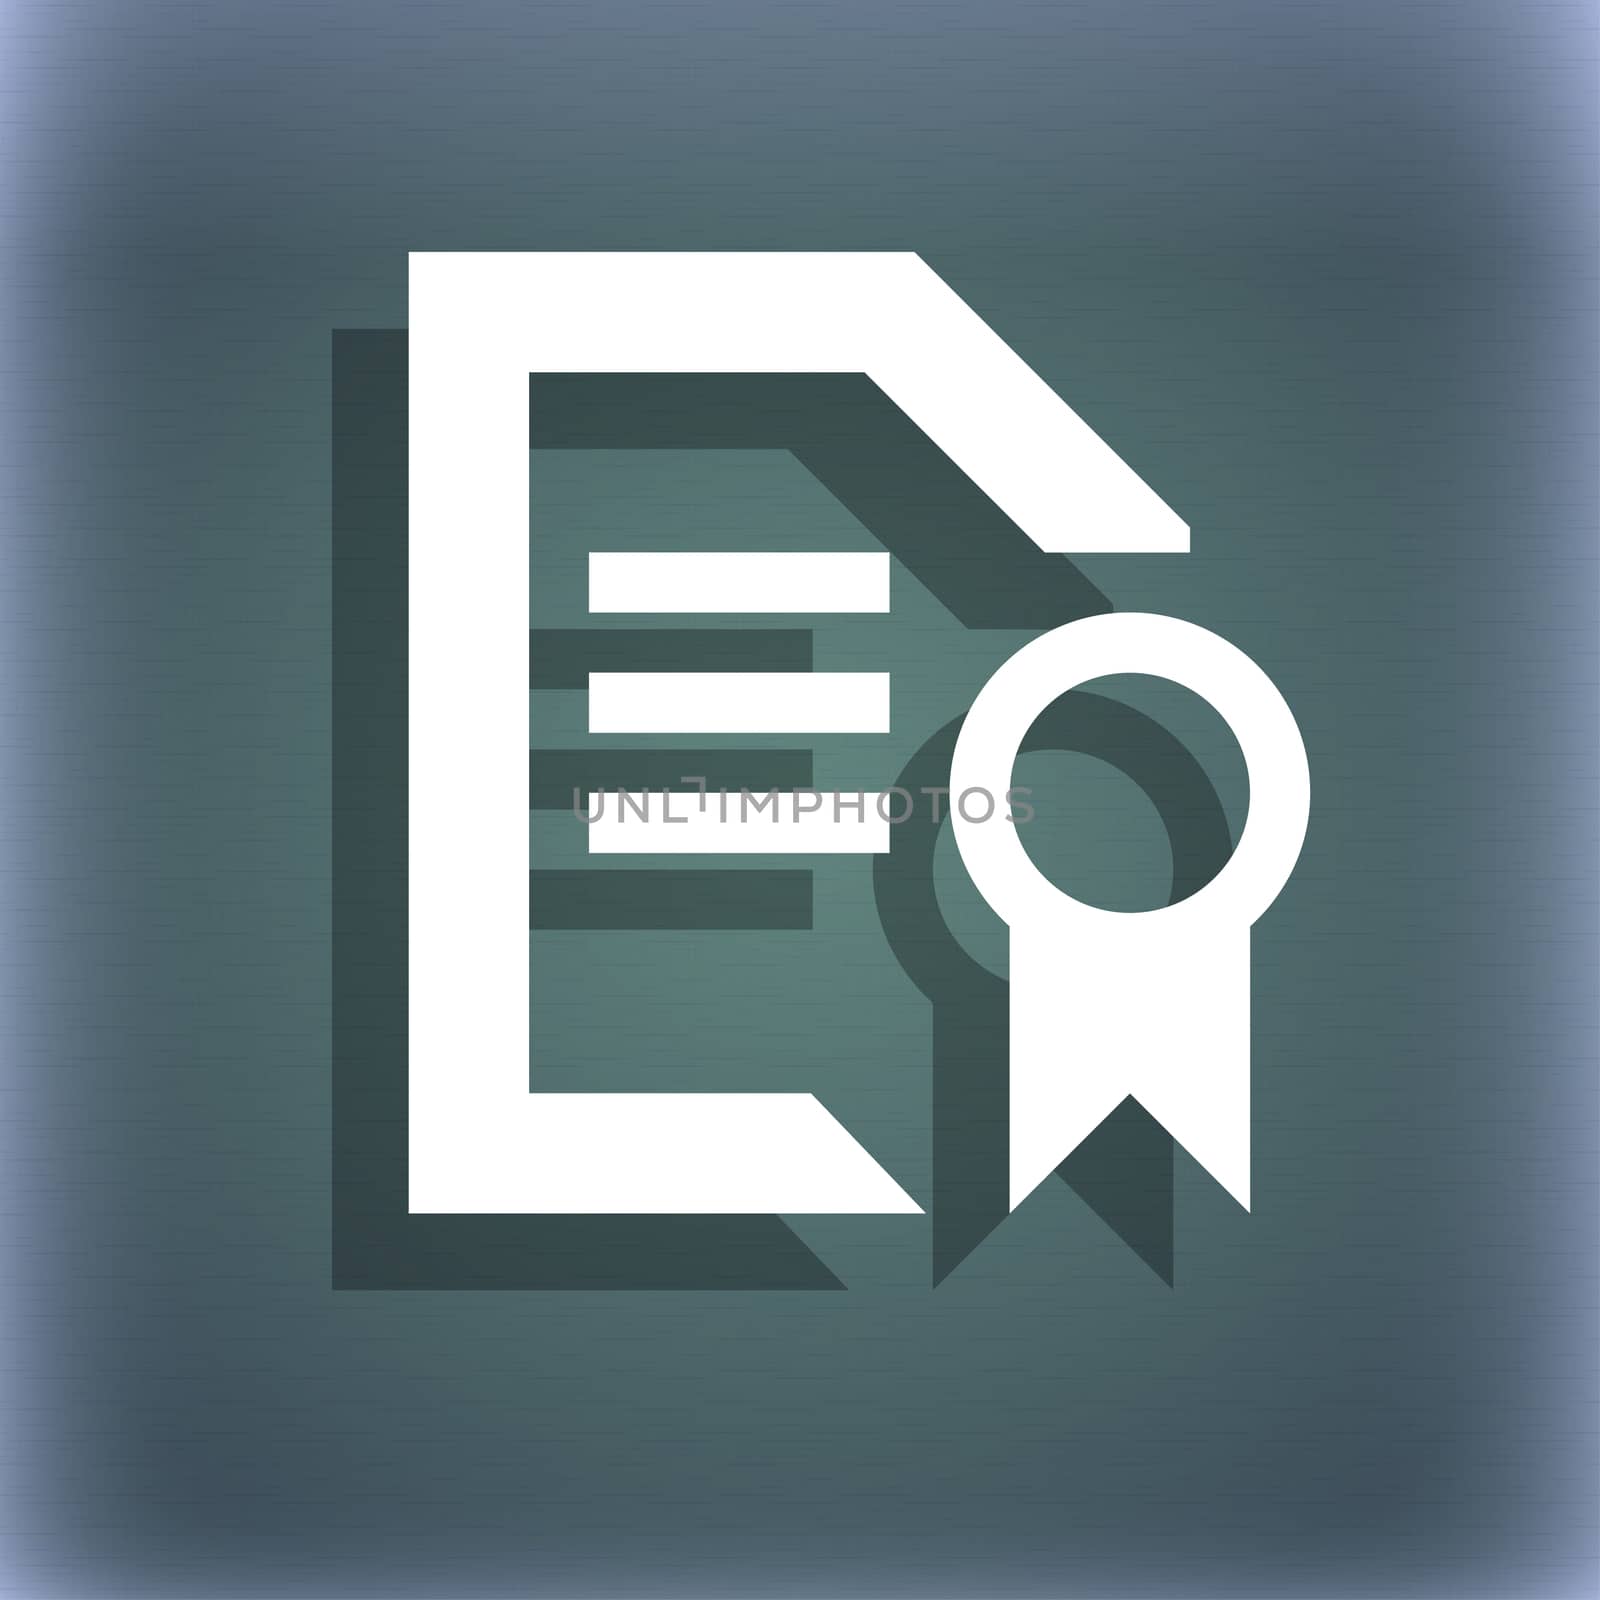 Award File document icon symbol on the blue-green abstract background with shadow and space for your text. illustration